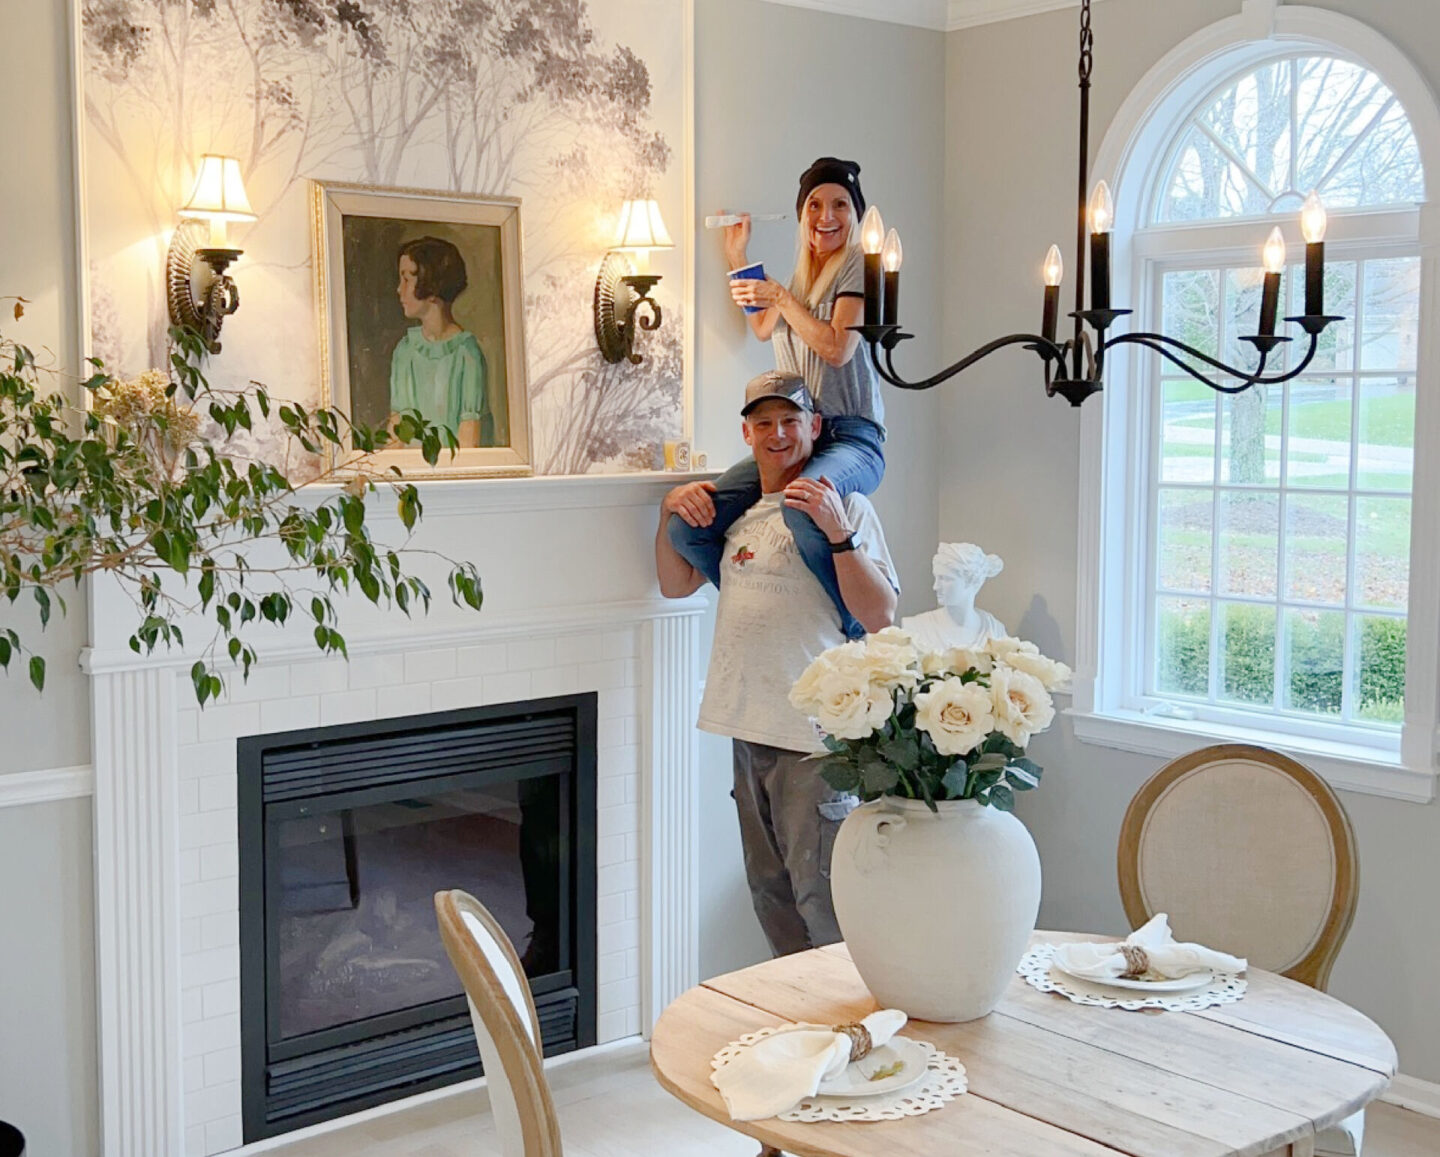 Michele on husband's shoulders painting fireplace trim - Hello Lovely Studio.